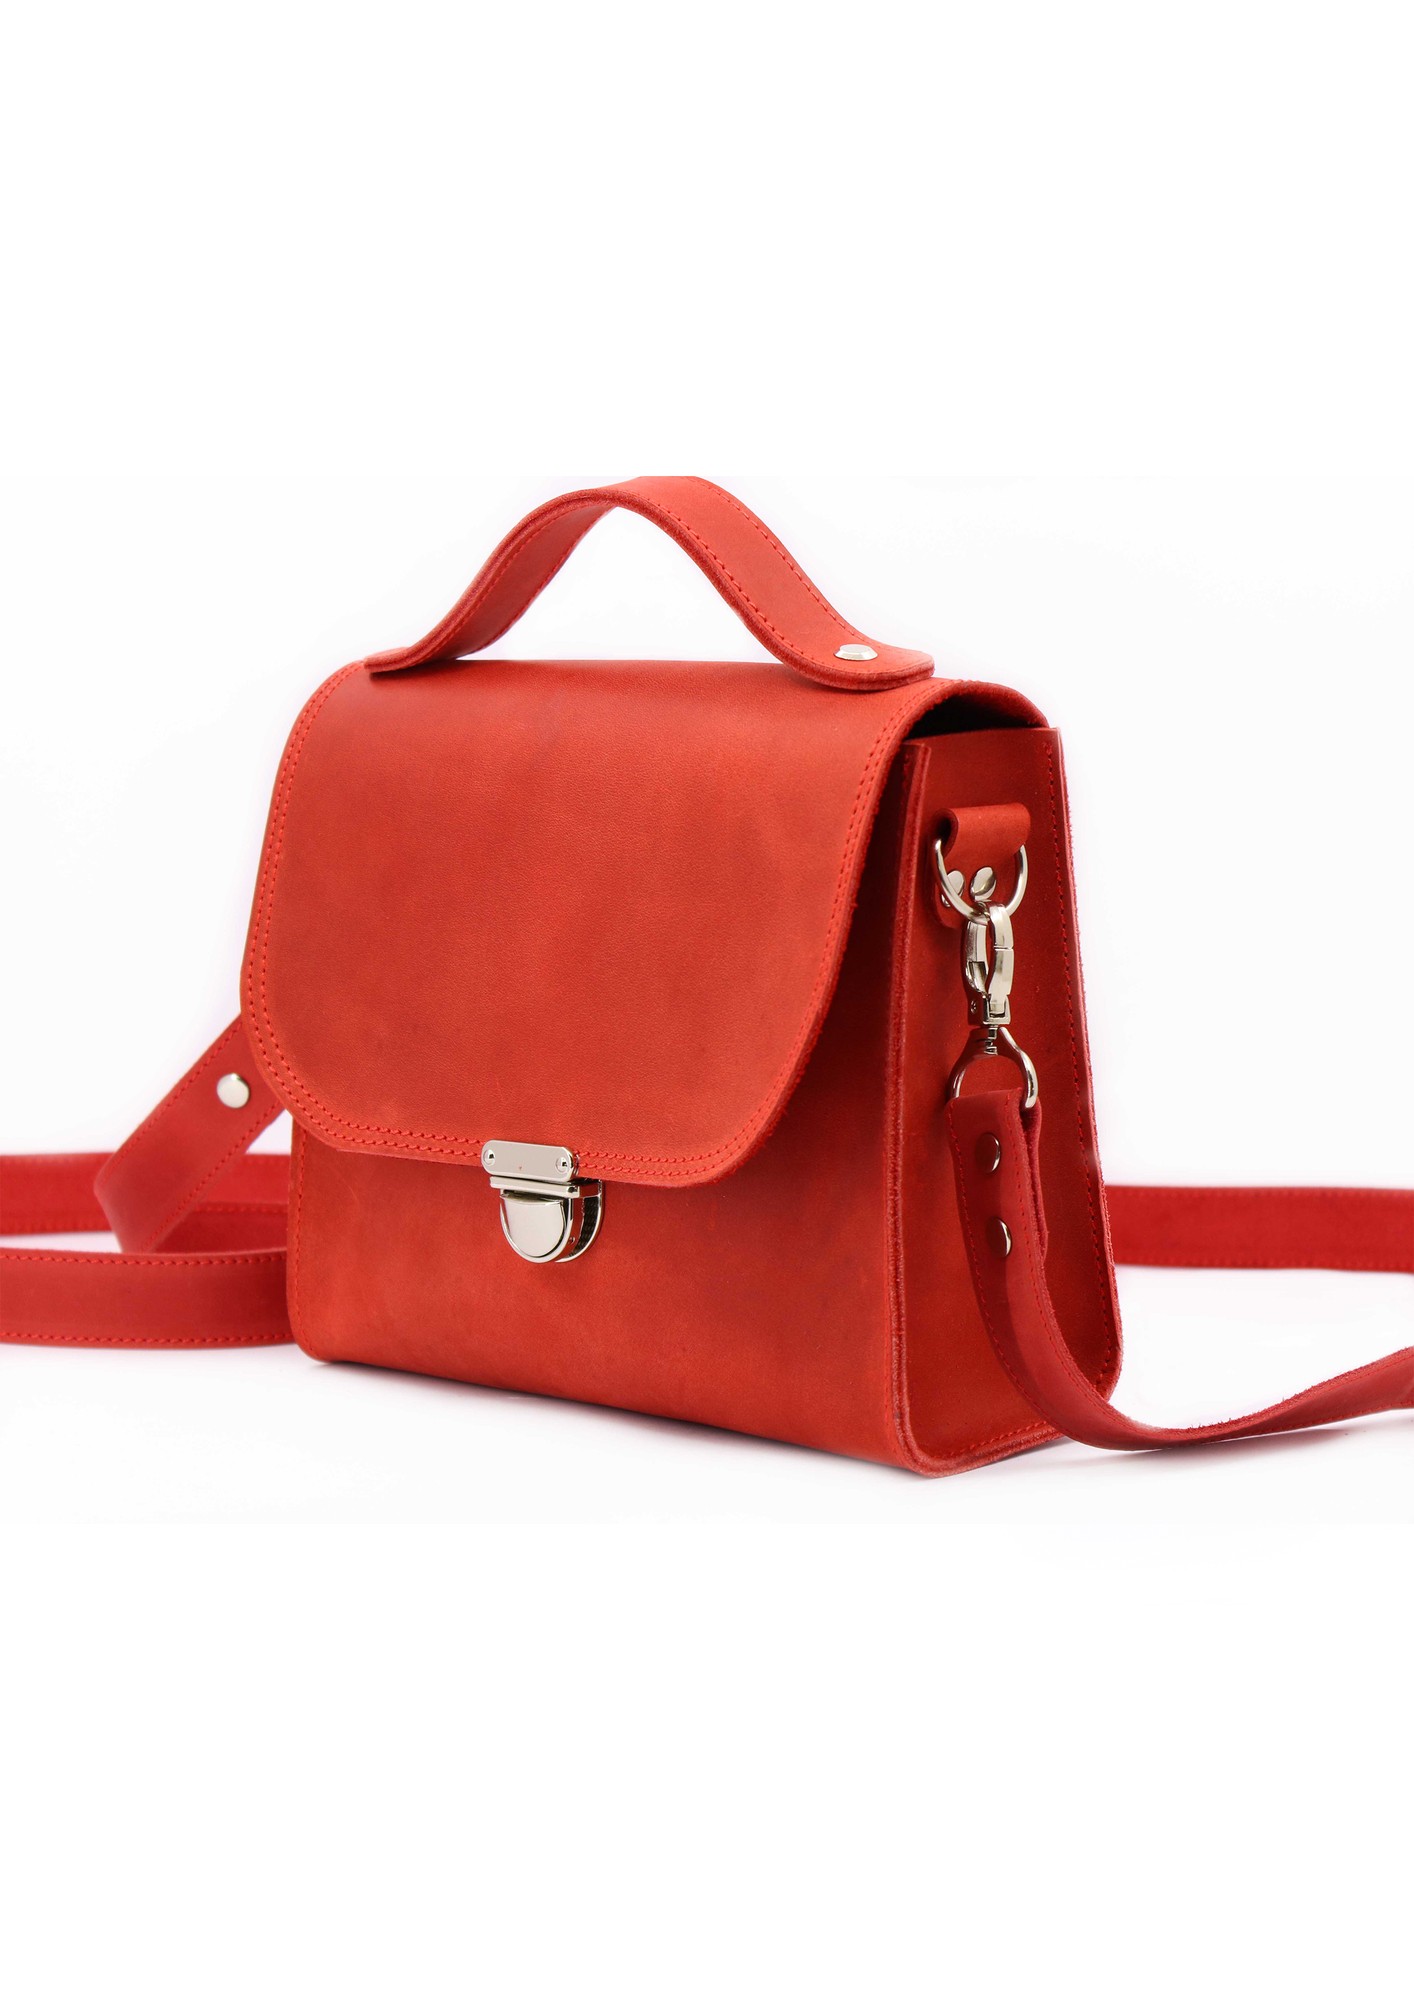 Small minimalist handmade women's briefcase/ bag with top handle and shoulder strap/ Red - 1034